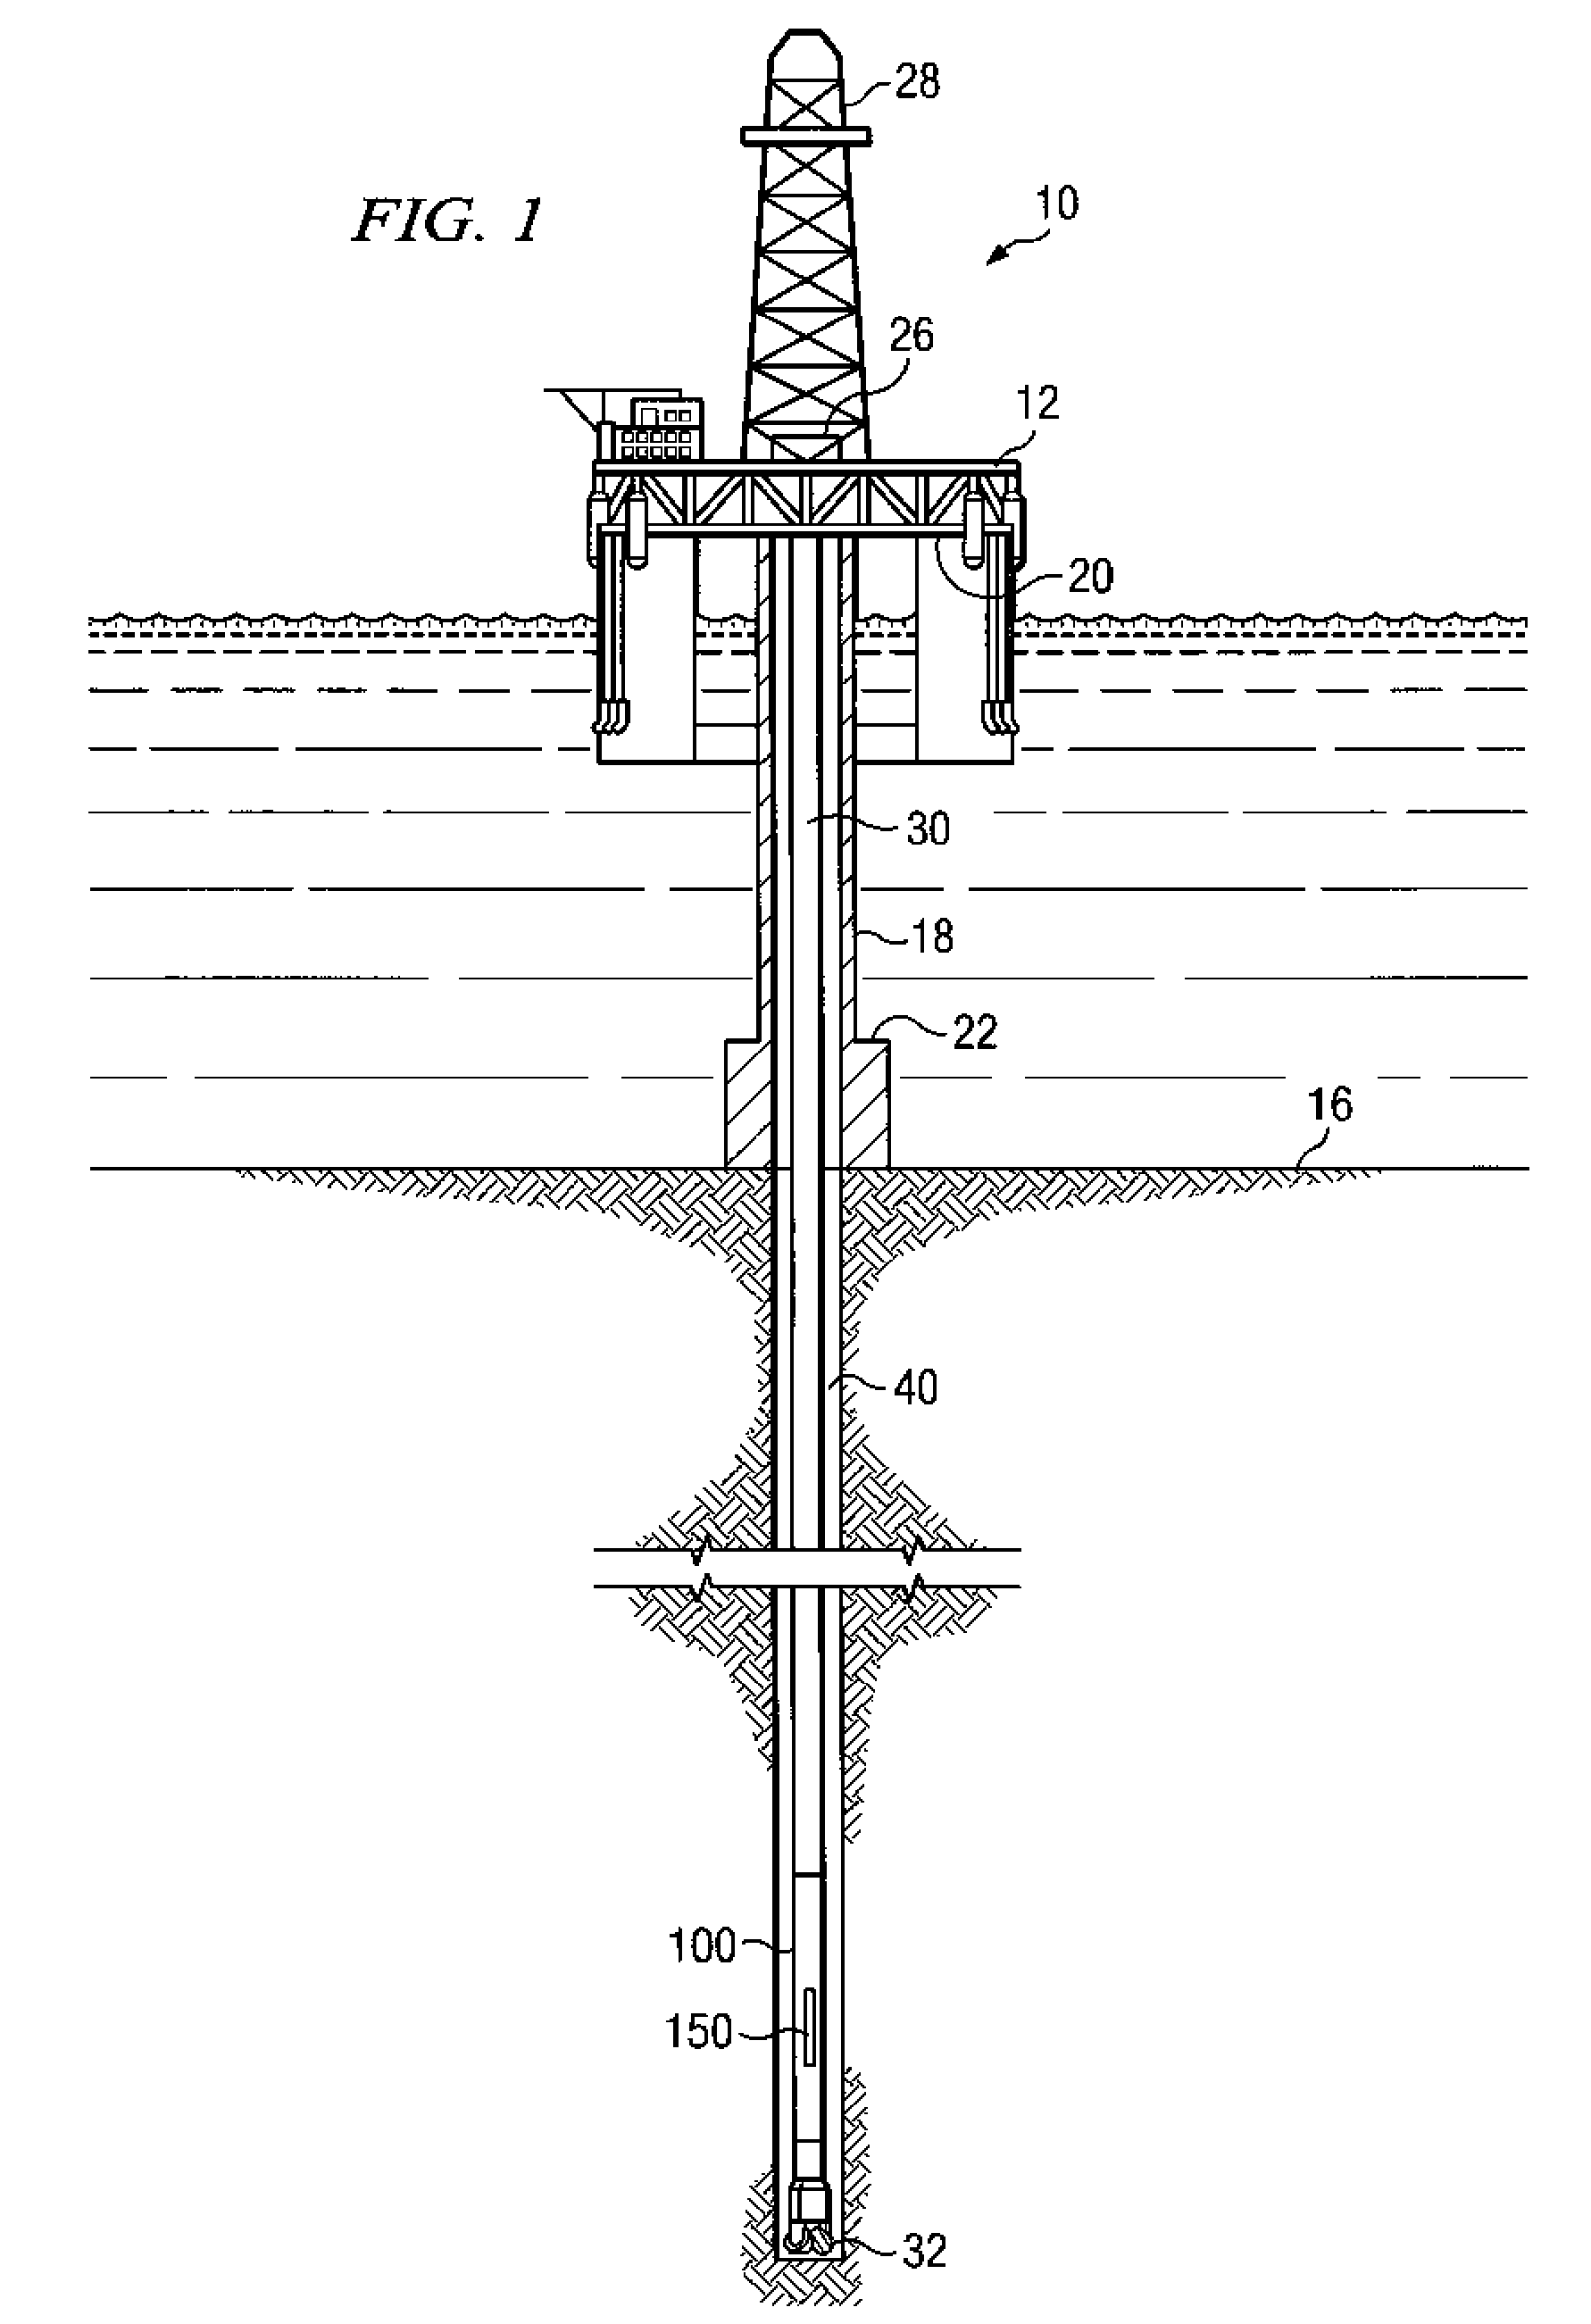 Slip ring apparatus for a rotary steerable tool